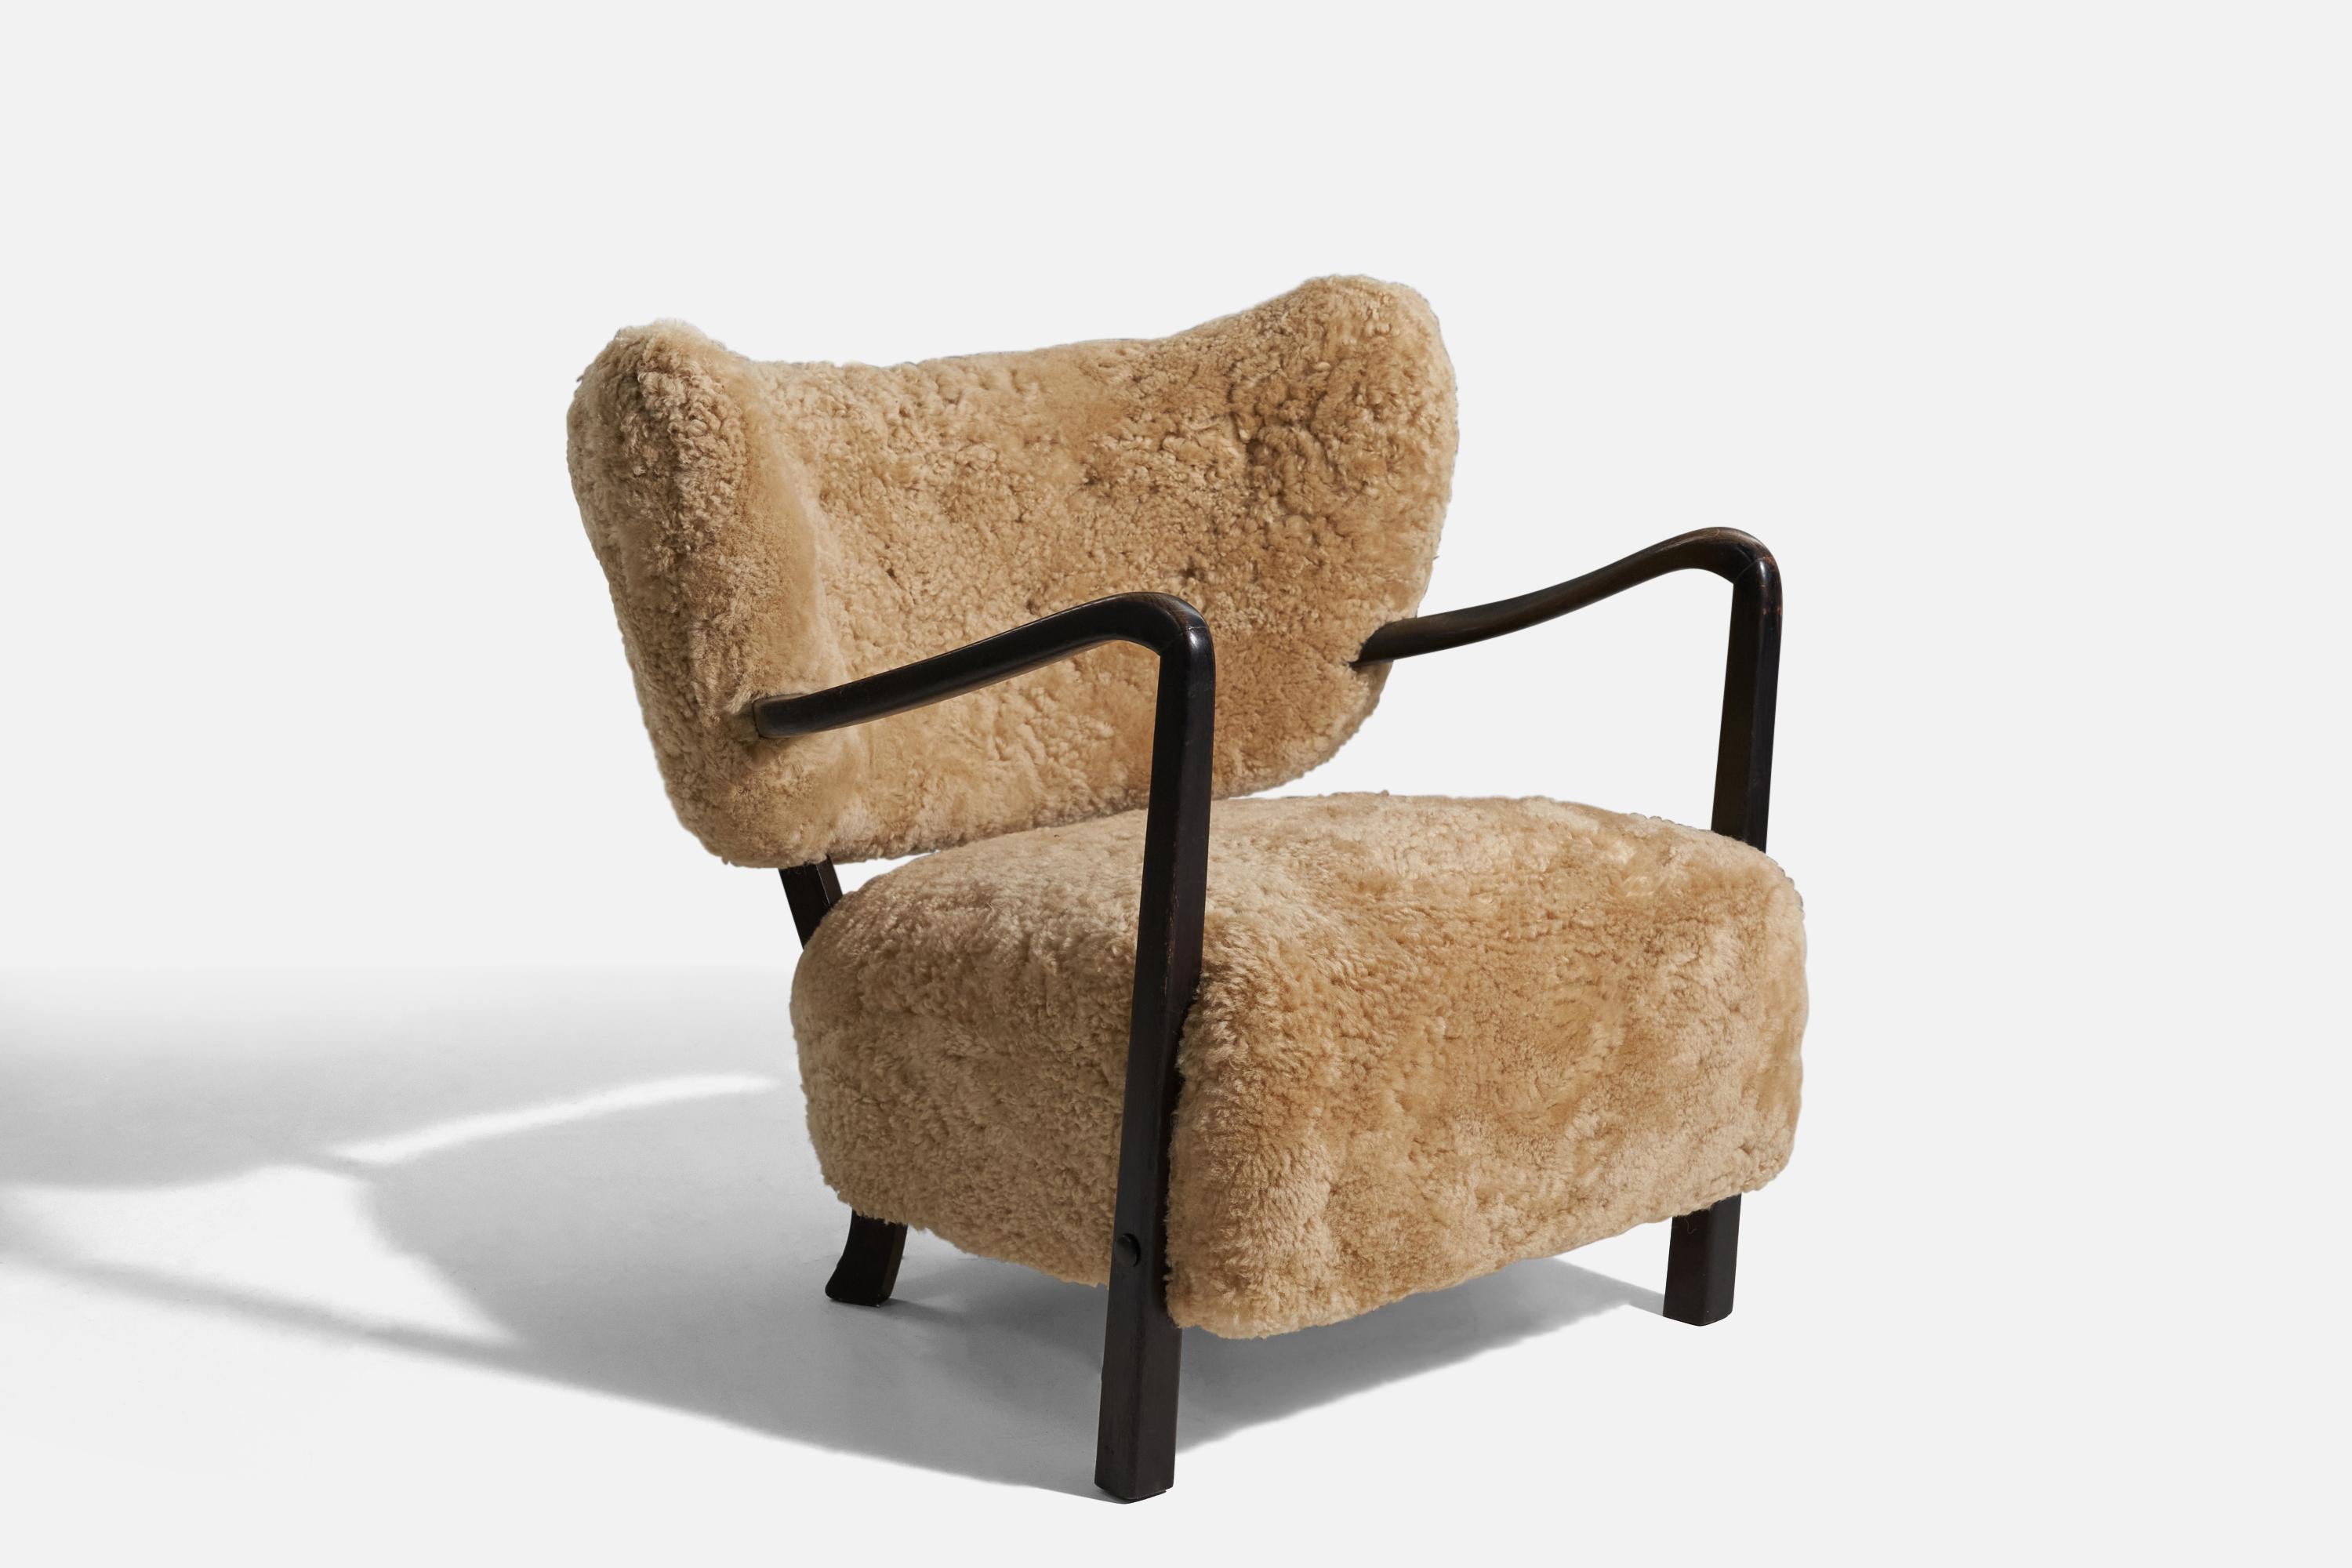 A wood and shearling lounge chair design attributed to Viggo Boesen. Likely produced by Hos Wulff c. 1940s, Denmark.


  

